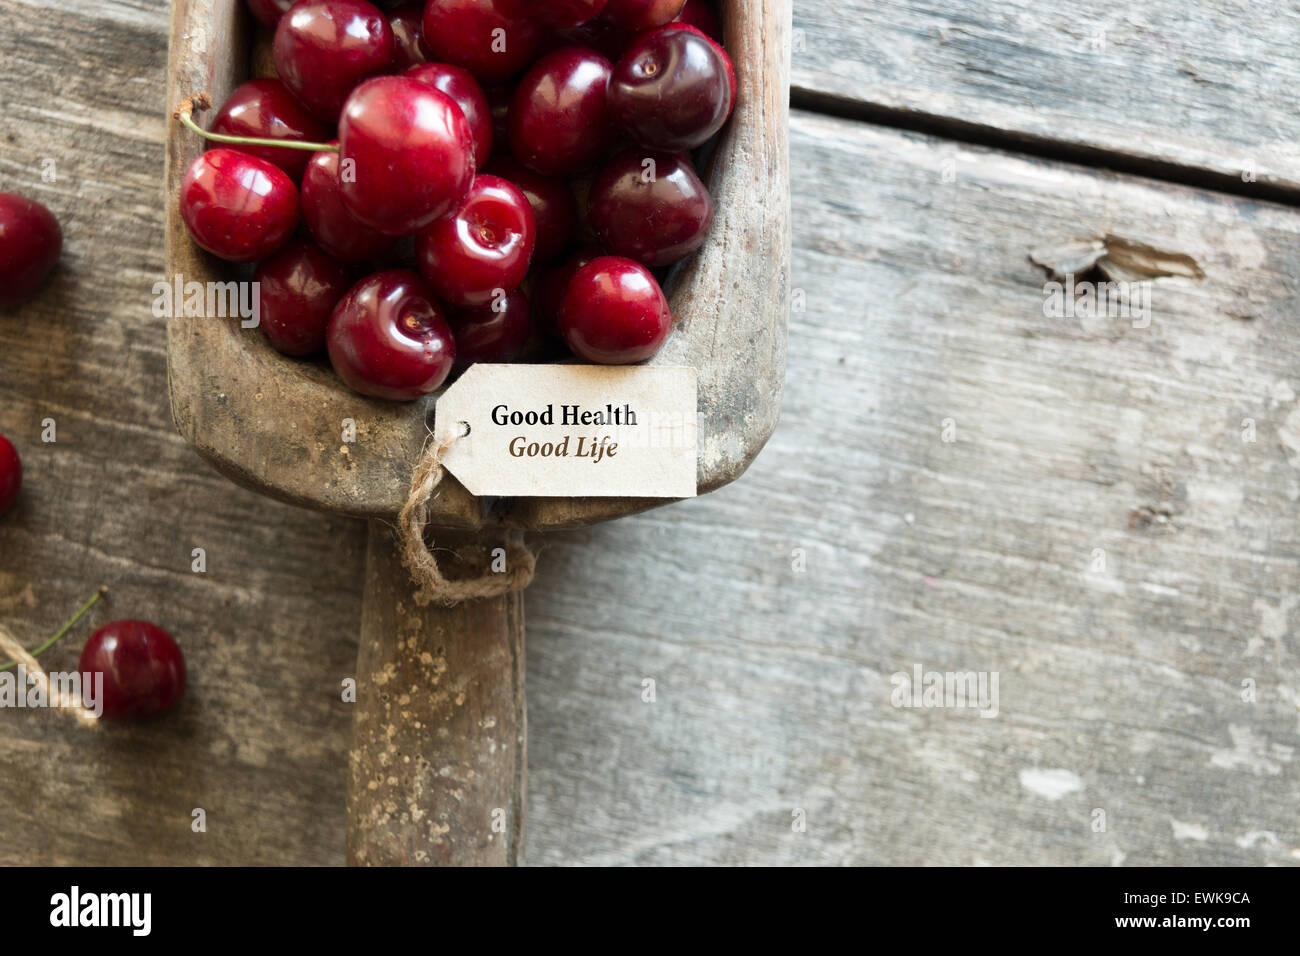 Good health good life. Ripe cherries and an inscription on a wooden table. Stock Photo